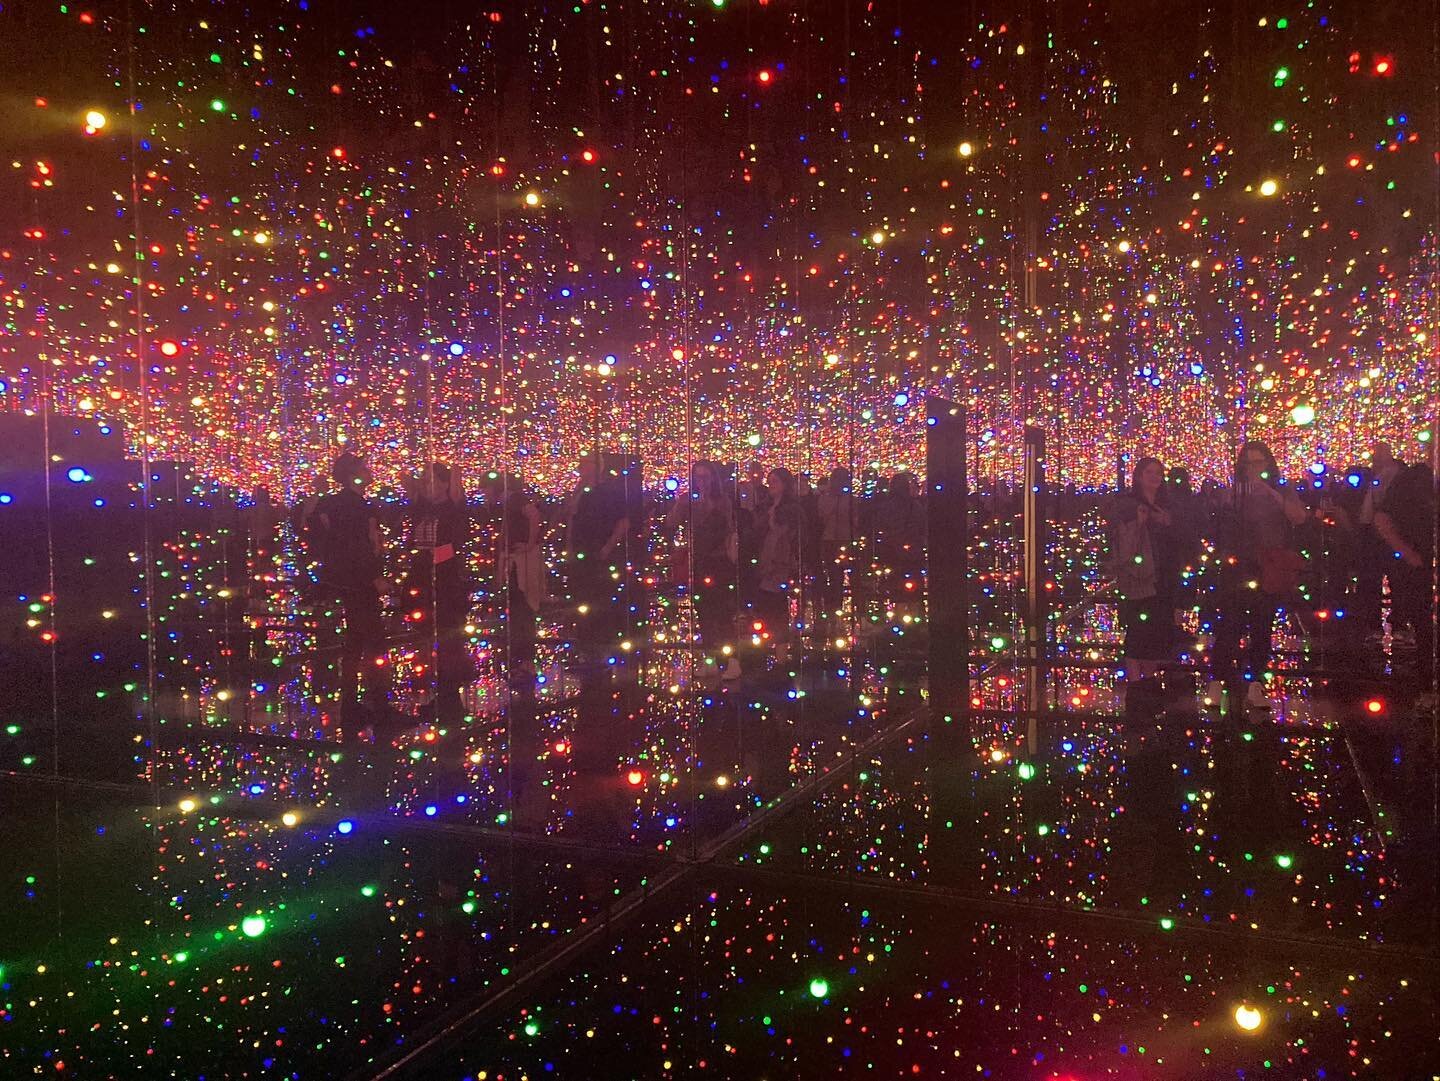 Infinity mirror rooms 😍😍😍 
Another exhibition where I knew nothing about the artist (Yayoi Kusama) before arriving at the gallery 🤷&zwj;♀️ see also Alice Neel